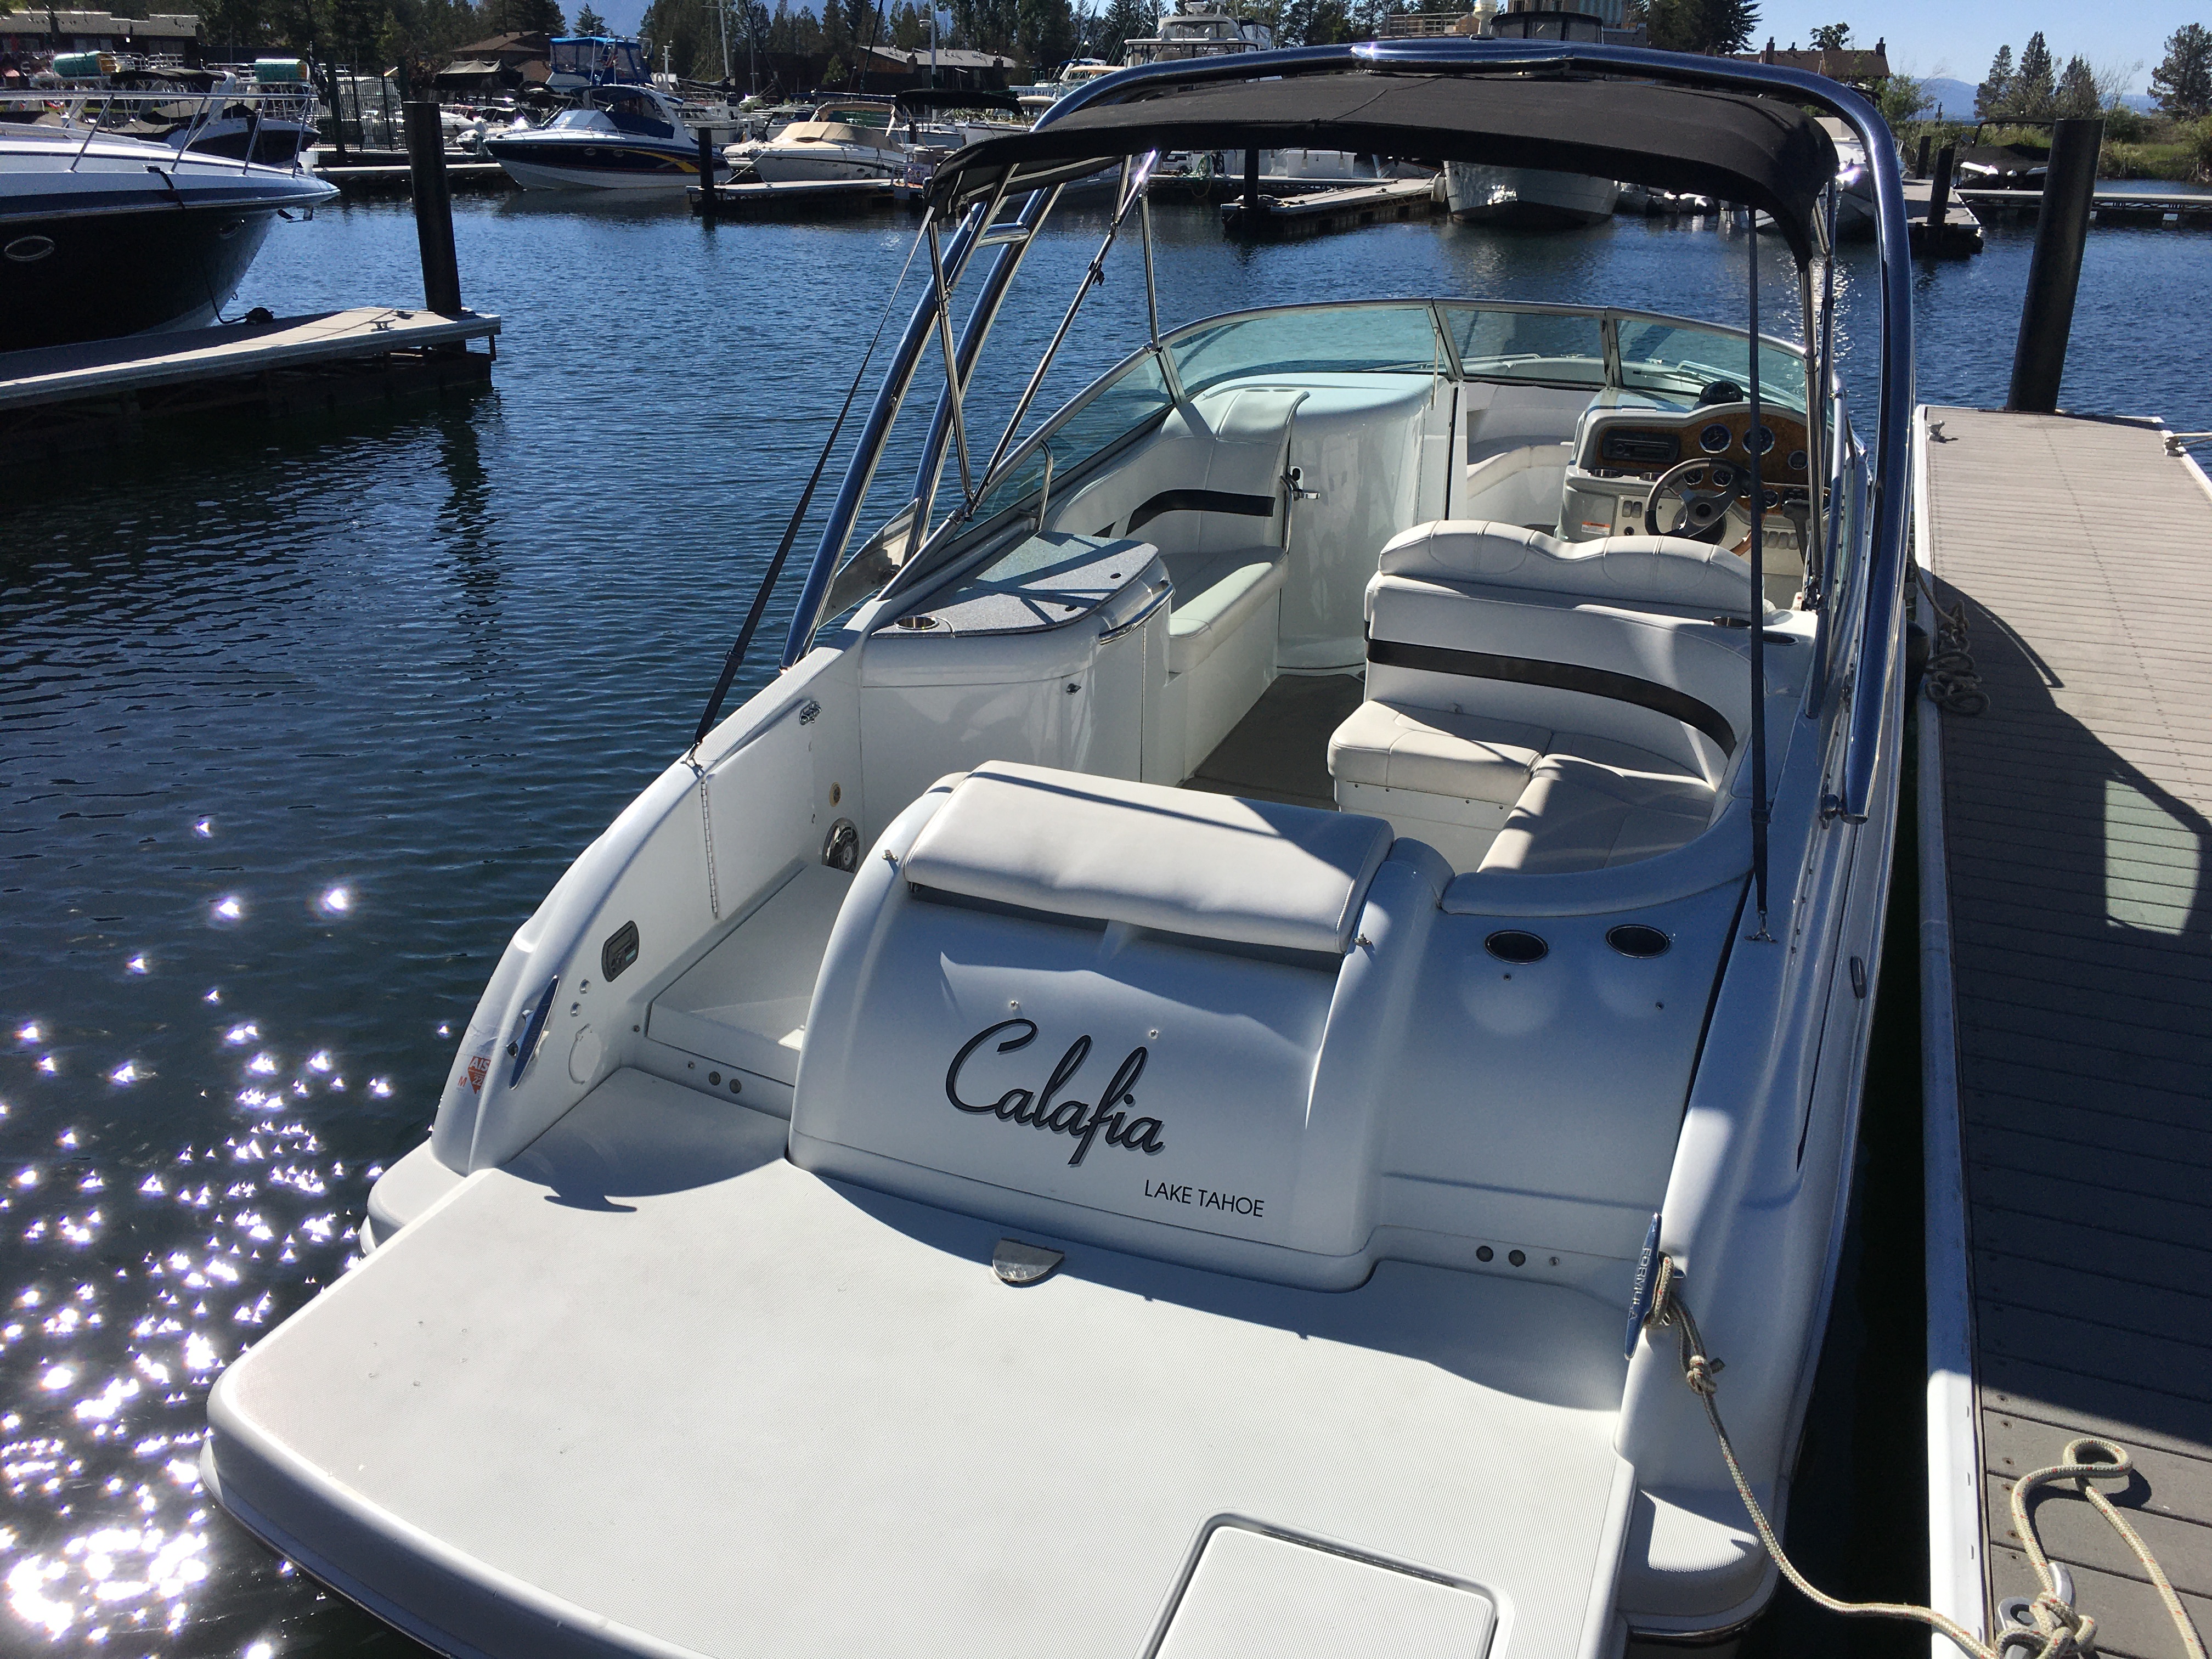 2001 Tahoe Boat Seats Discount Clearance